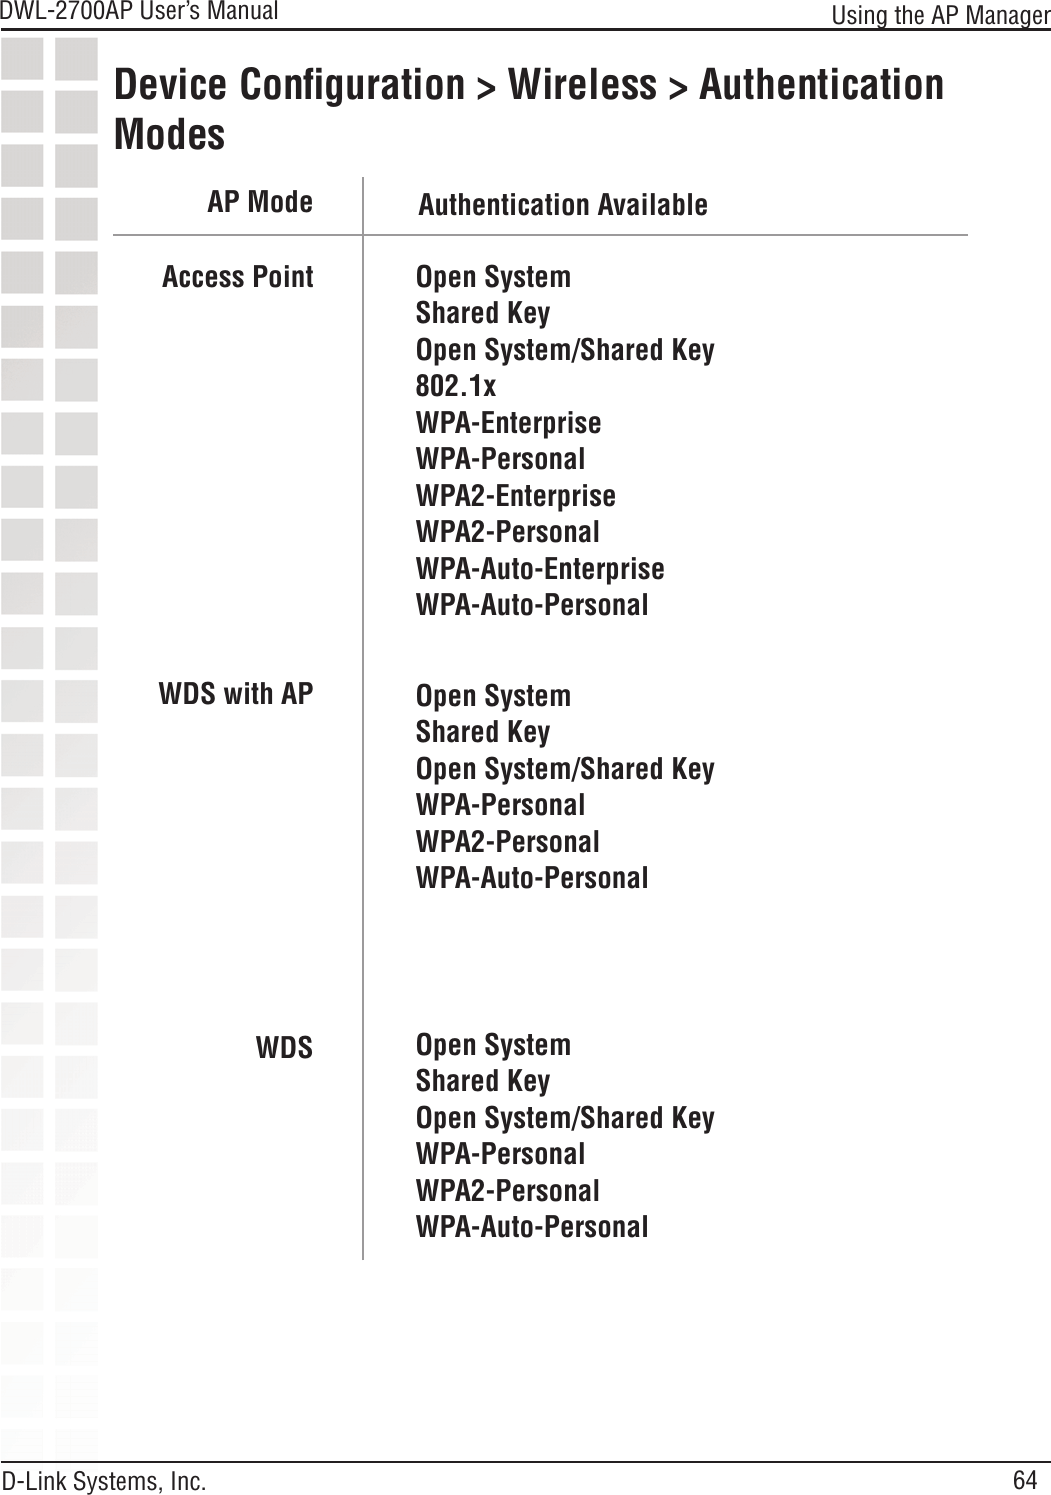 64DWL-2700AP User’s Manual D-Link Systems, Inc.Access PointWDS with APWDSOpen SystemShared KeyOpen System/Shared Key802.1xWPA-EnterpriseWPA-PersonalWPA2-EnterpriseWPA2-PersonalWPA-Auto-EnterpriseWPA-Auto-PersonalOpen SystemShared KeyOpen System/Shared KeyWPA-PersonalWPA2-PersonalWPA-Auto-PersonalAP Mode Authentication AvailableDevice Conﬁguration &gt; Wireless &gt; Authentication ModesUsing the AP ManagerOpen SystemShared KeyOpen System/Shared KeyWPA-PersonalWPA2-PersonalWPA-Auto-Personal